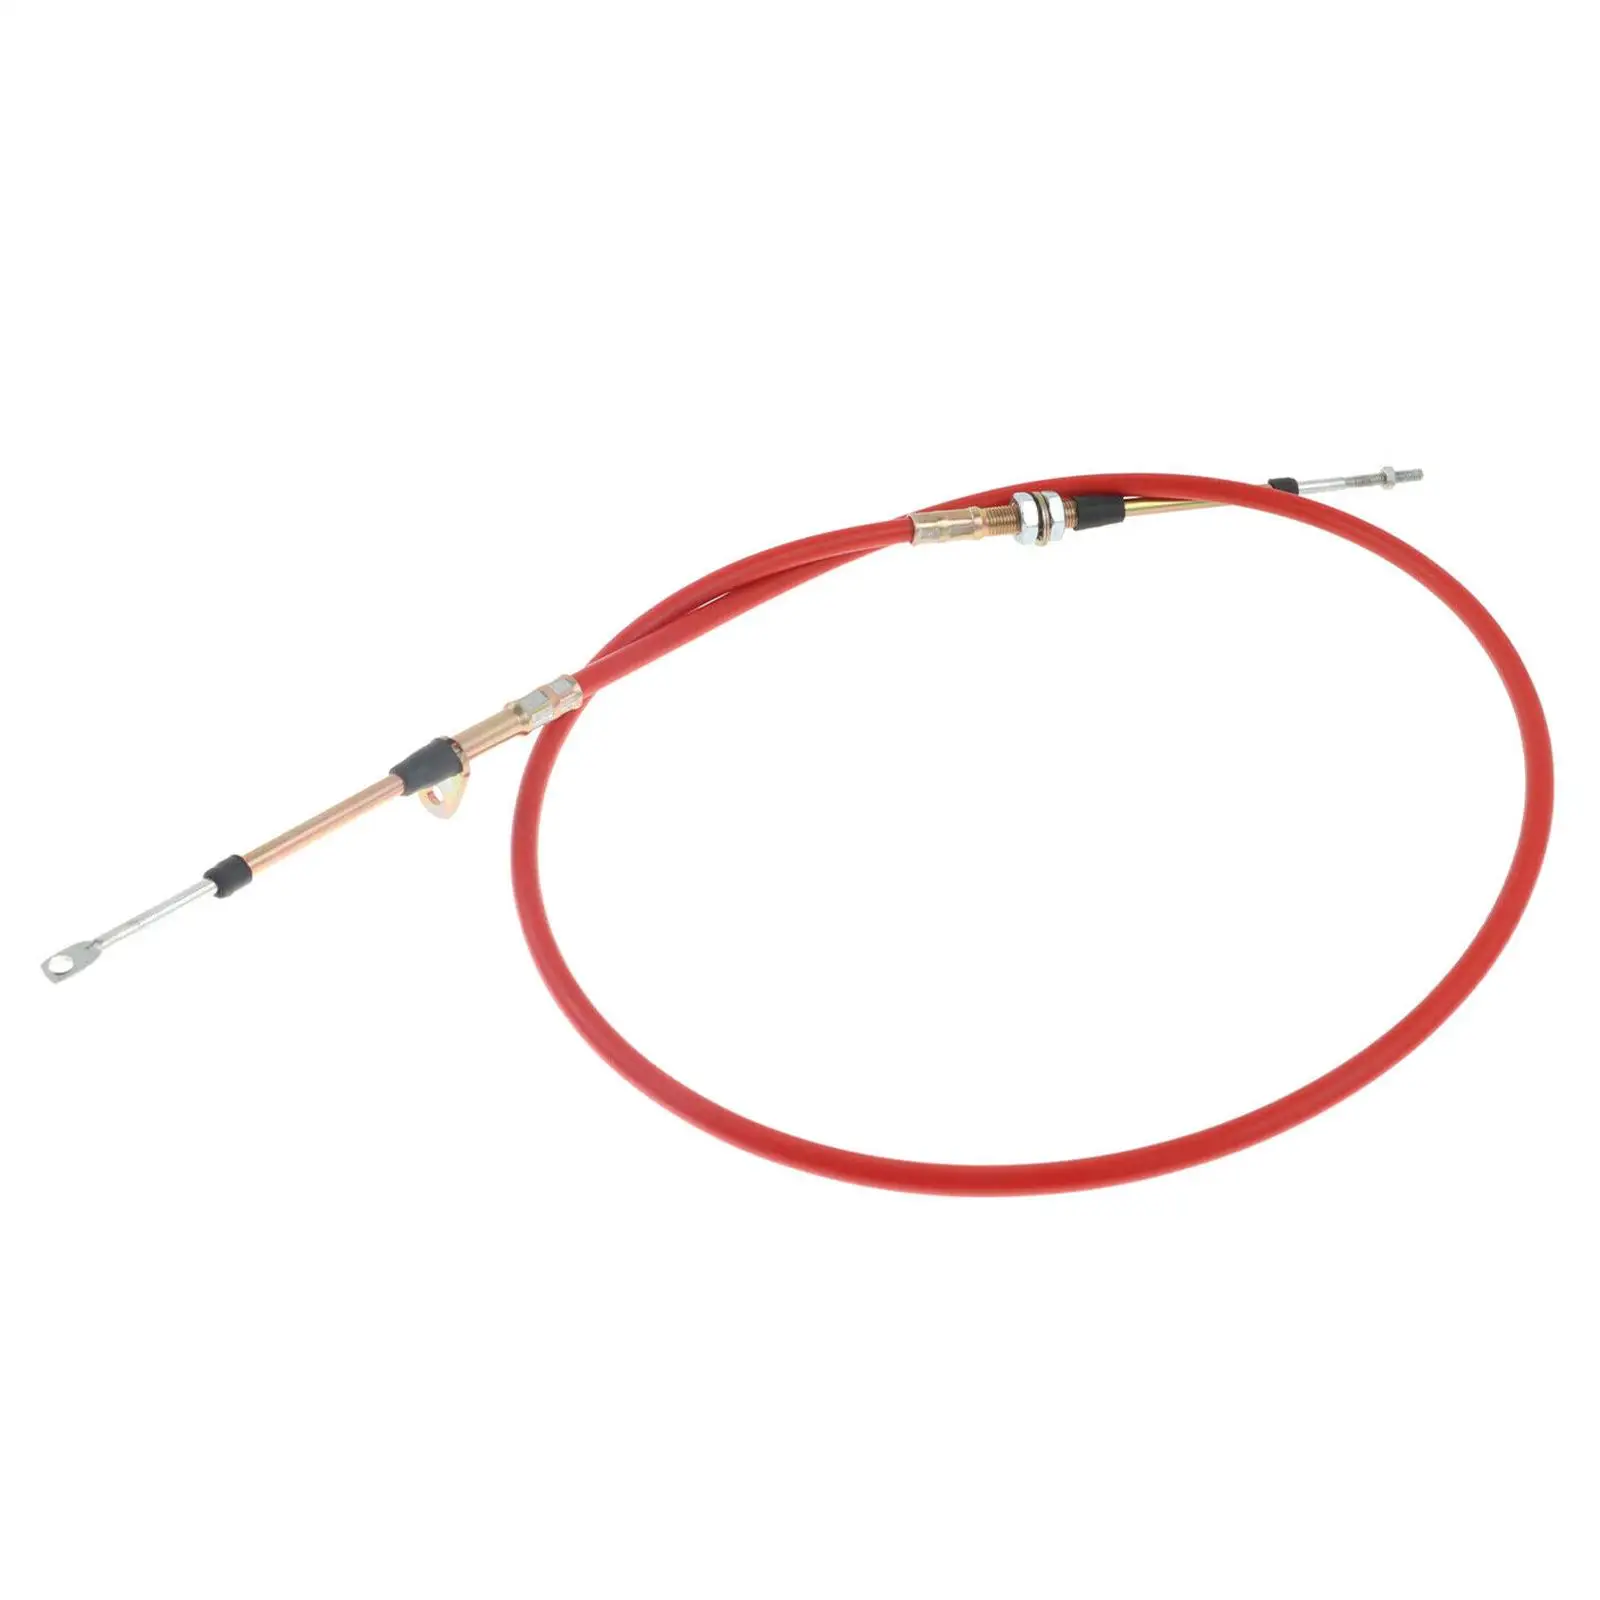 Shifter Cable Heavy Duty AF721002 Accessories for B M Shifters Easily Install